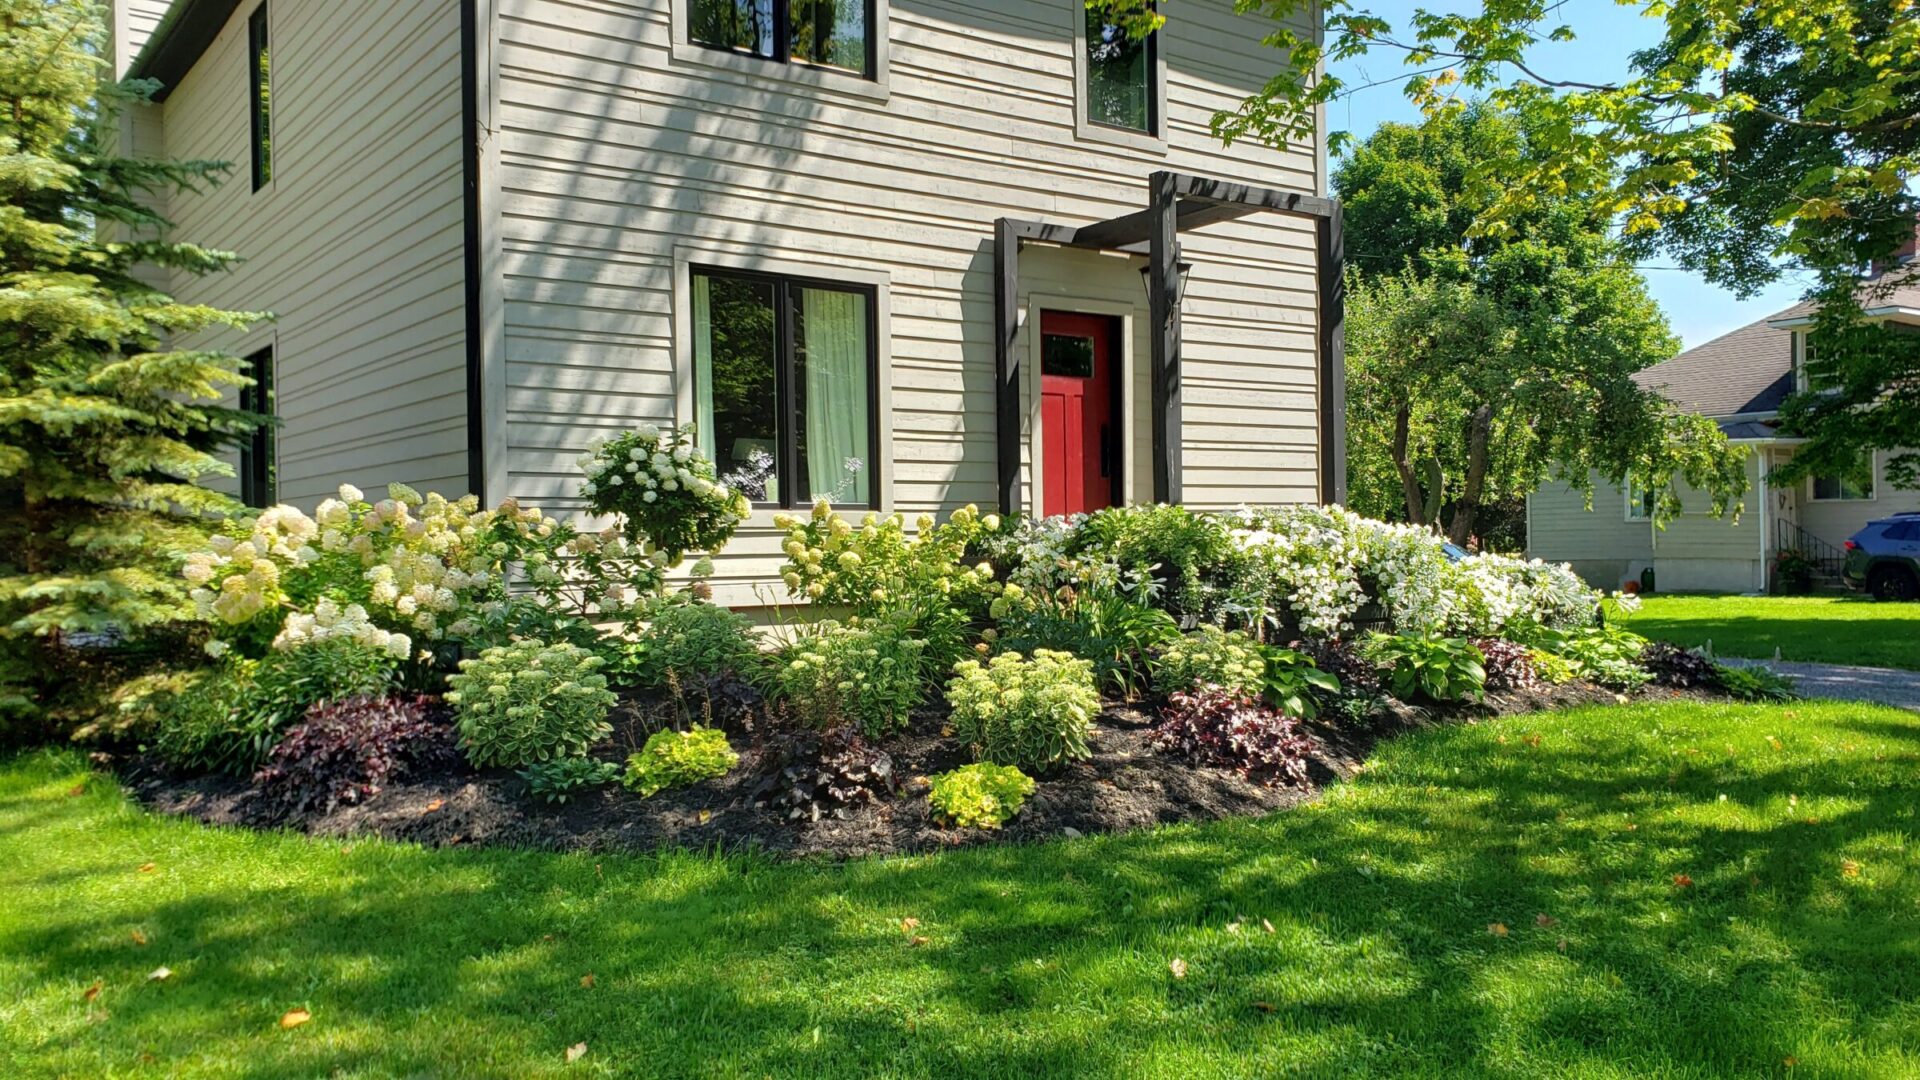 A beige house with green shutters, red door, and a front garden filled with hydrangeas and other greenery under a sunny sky.